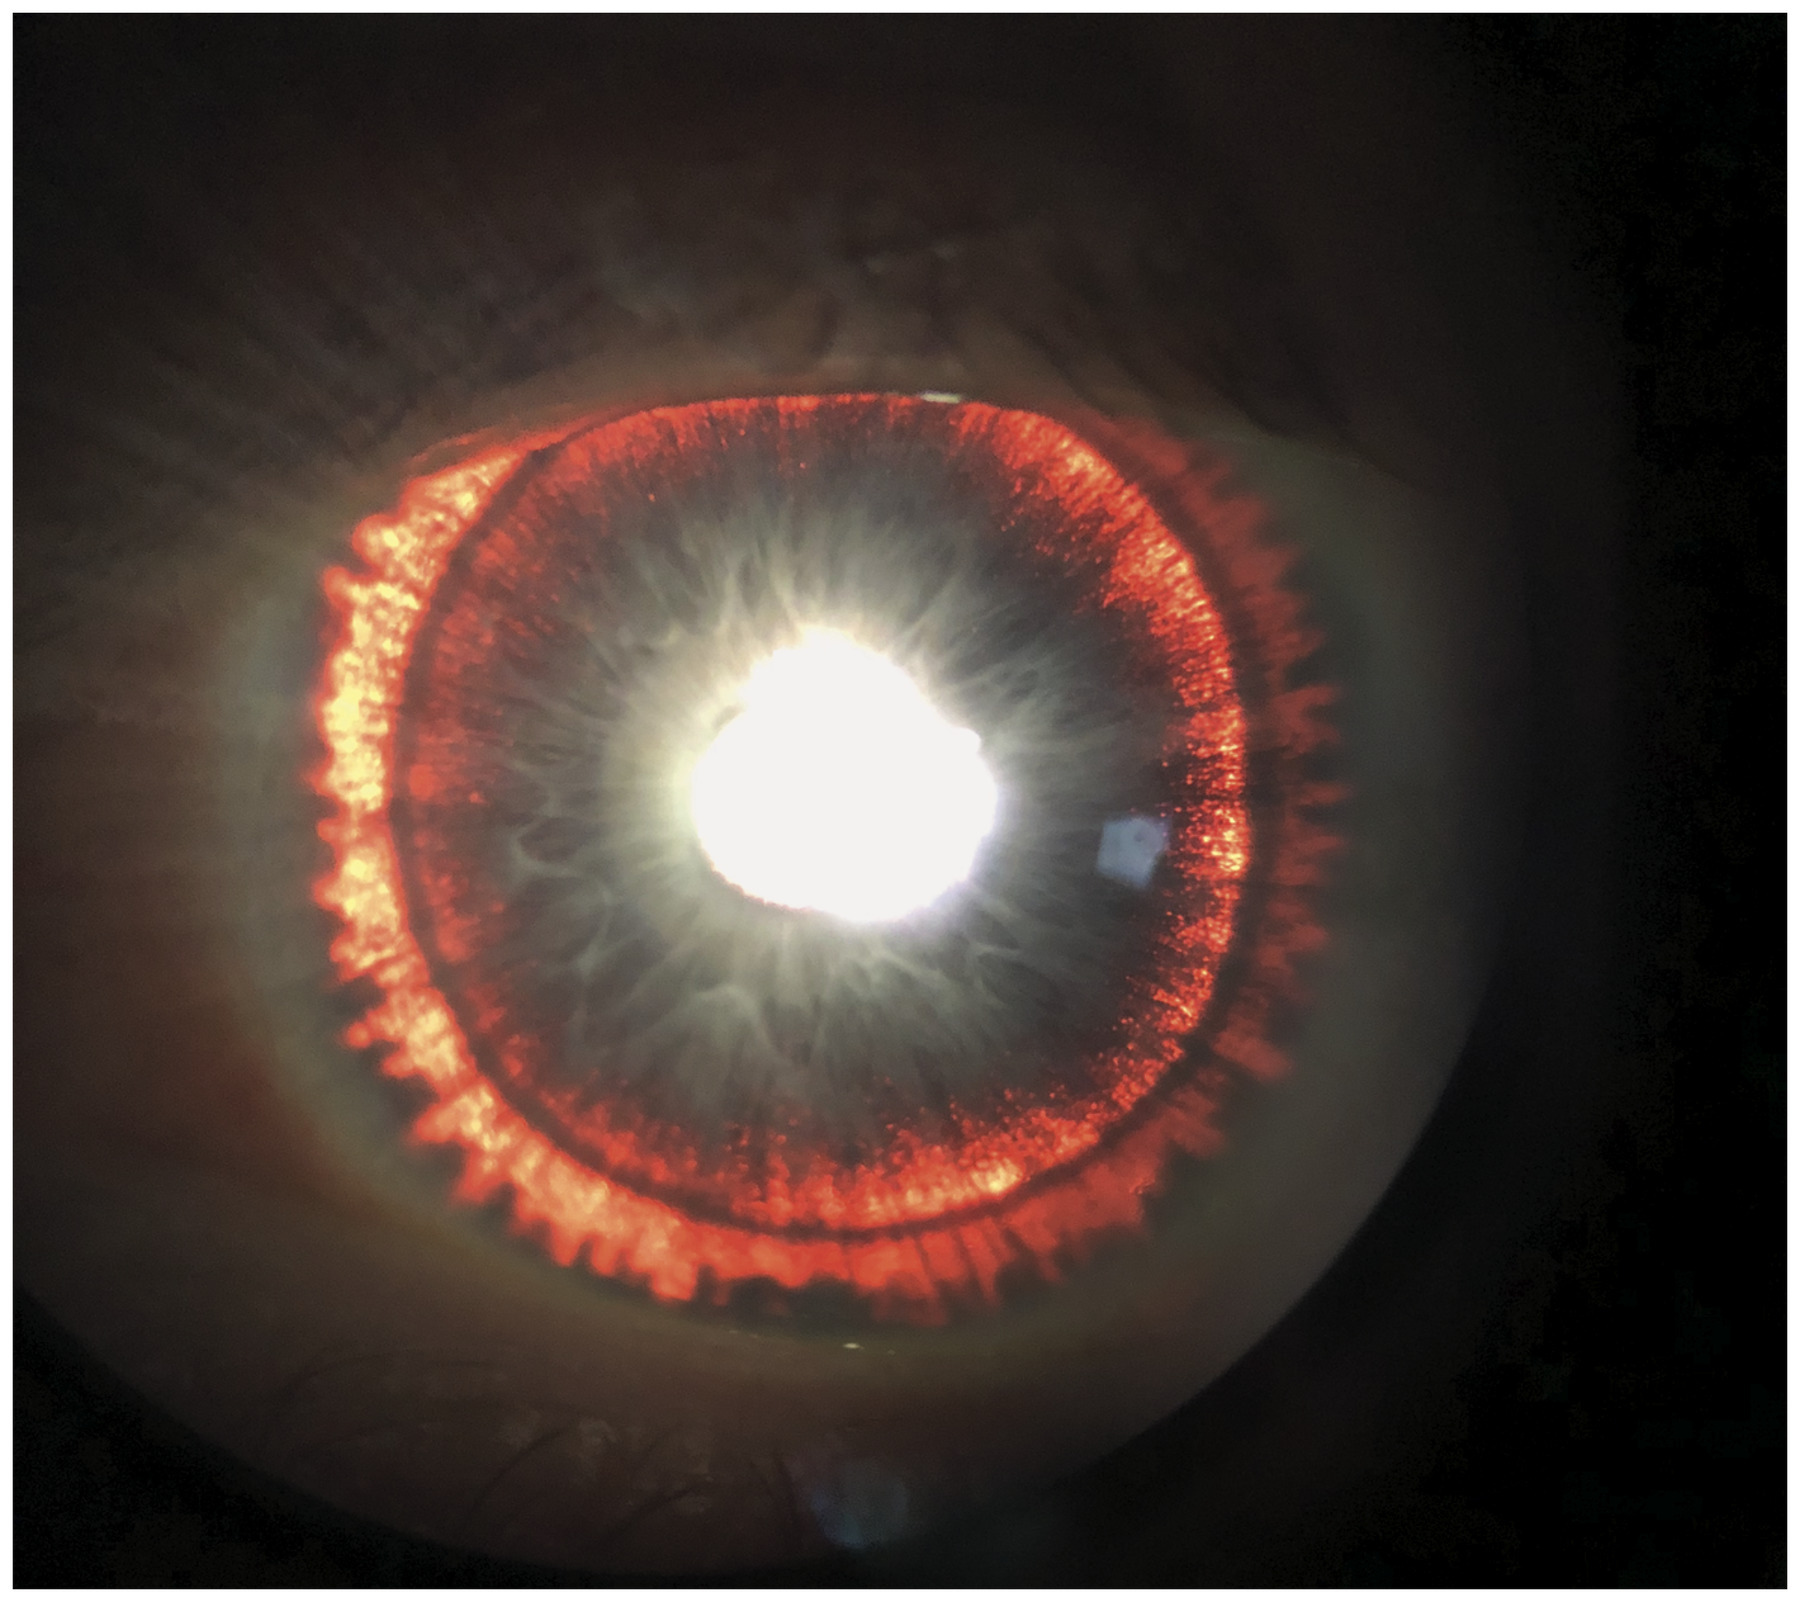 Rare genetic condition gives man Eye of Sauron look | Ars Technica